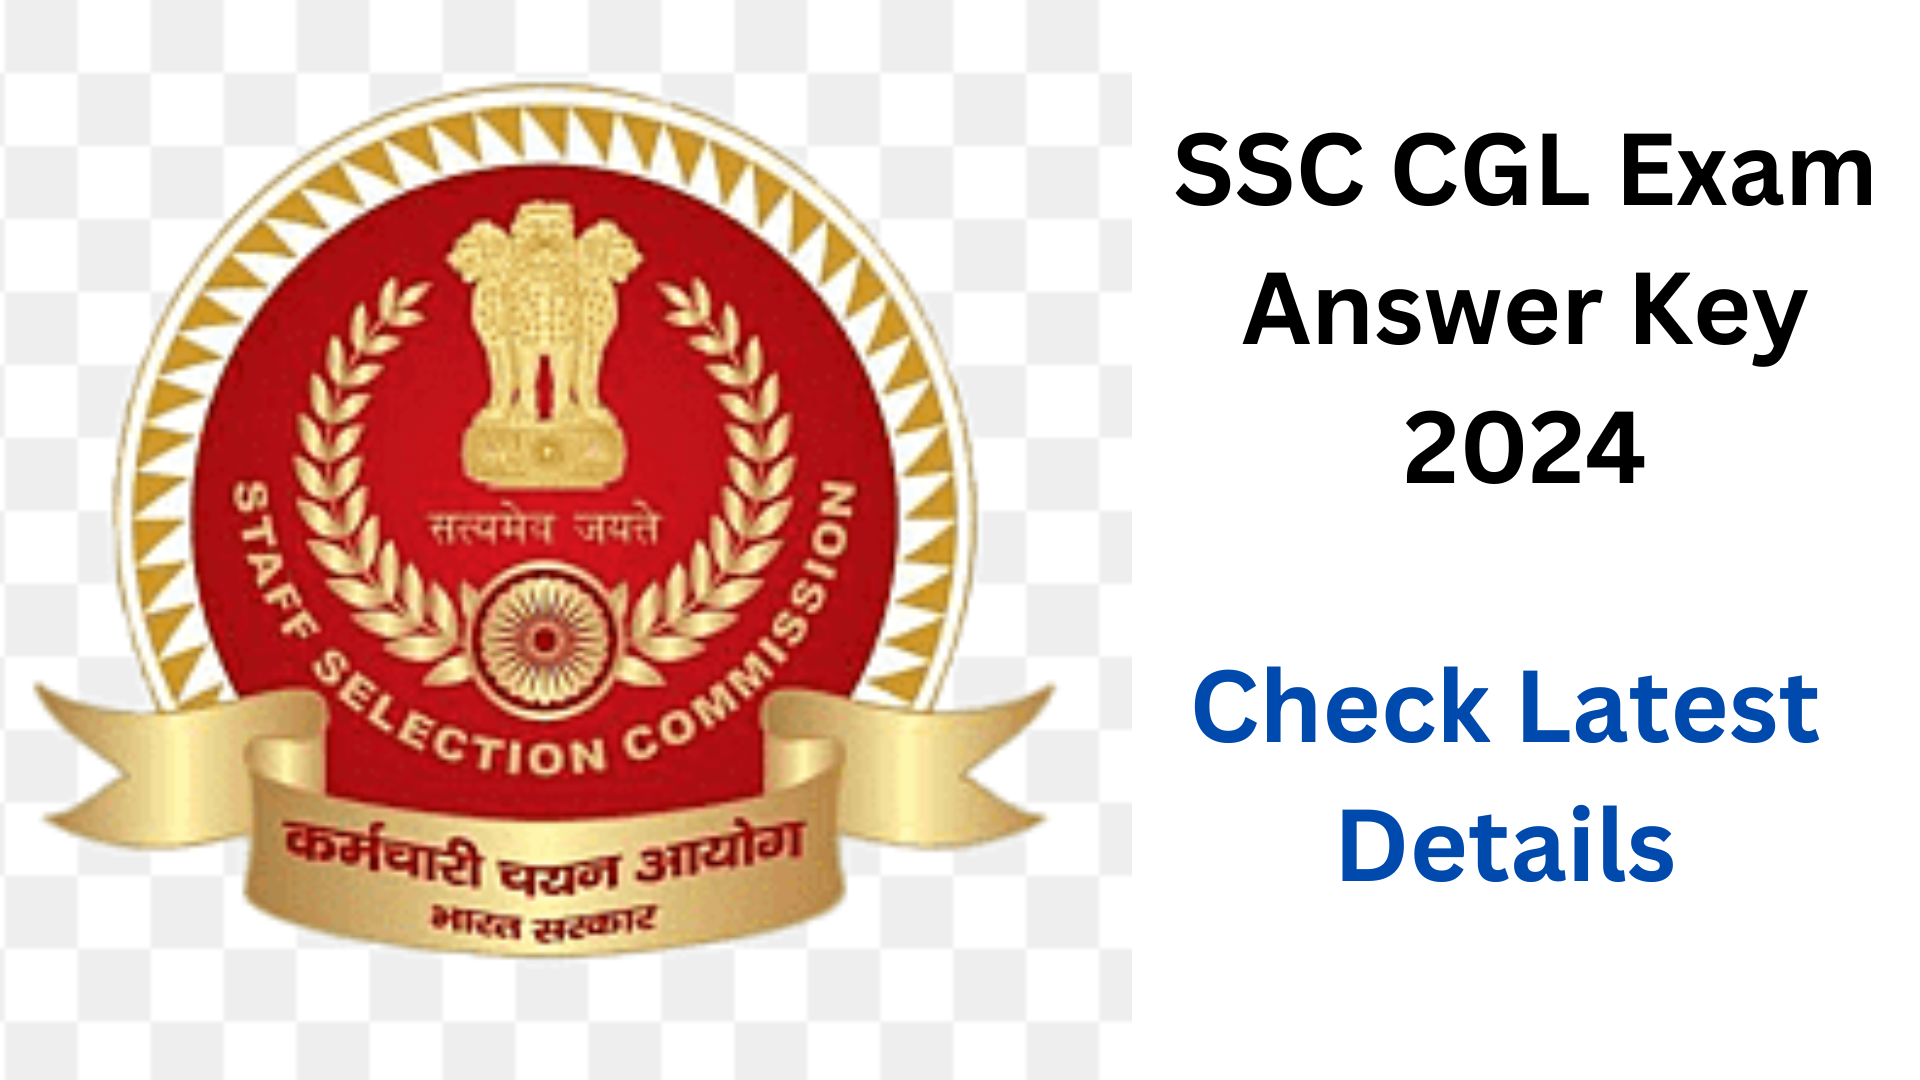 SSC CGL Answer Key 2024, Check Latest Marking Scheme, Raise Objections, and More